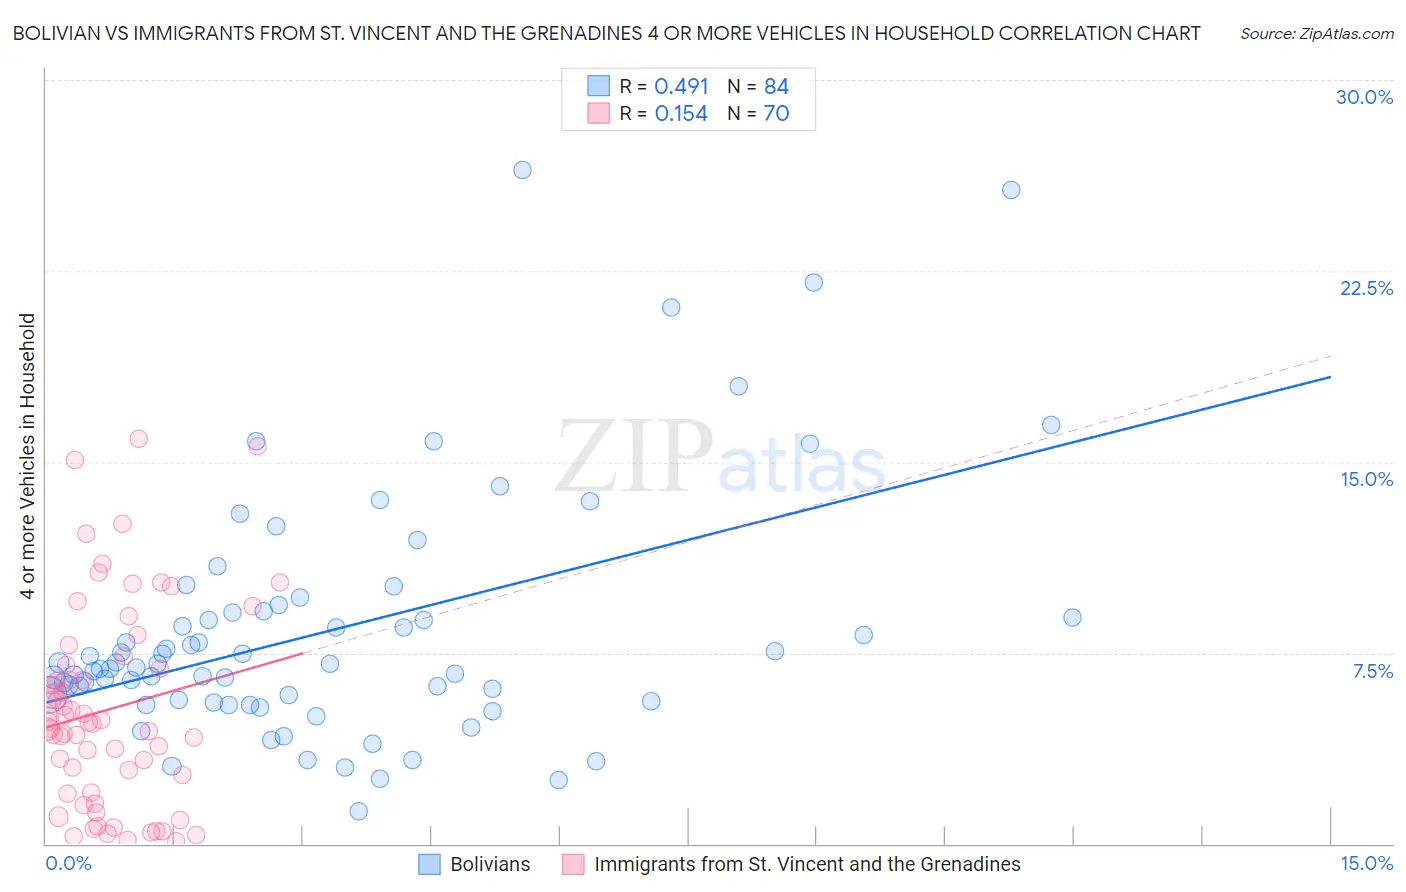 Bolivian vs Immigrants from St. Vincent and the Grenadines 4 or more Vehicles in Household